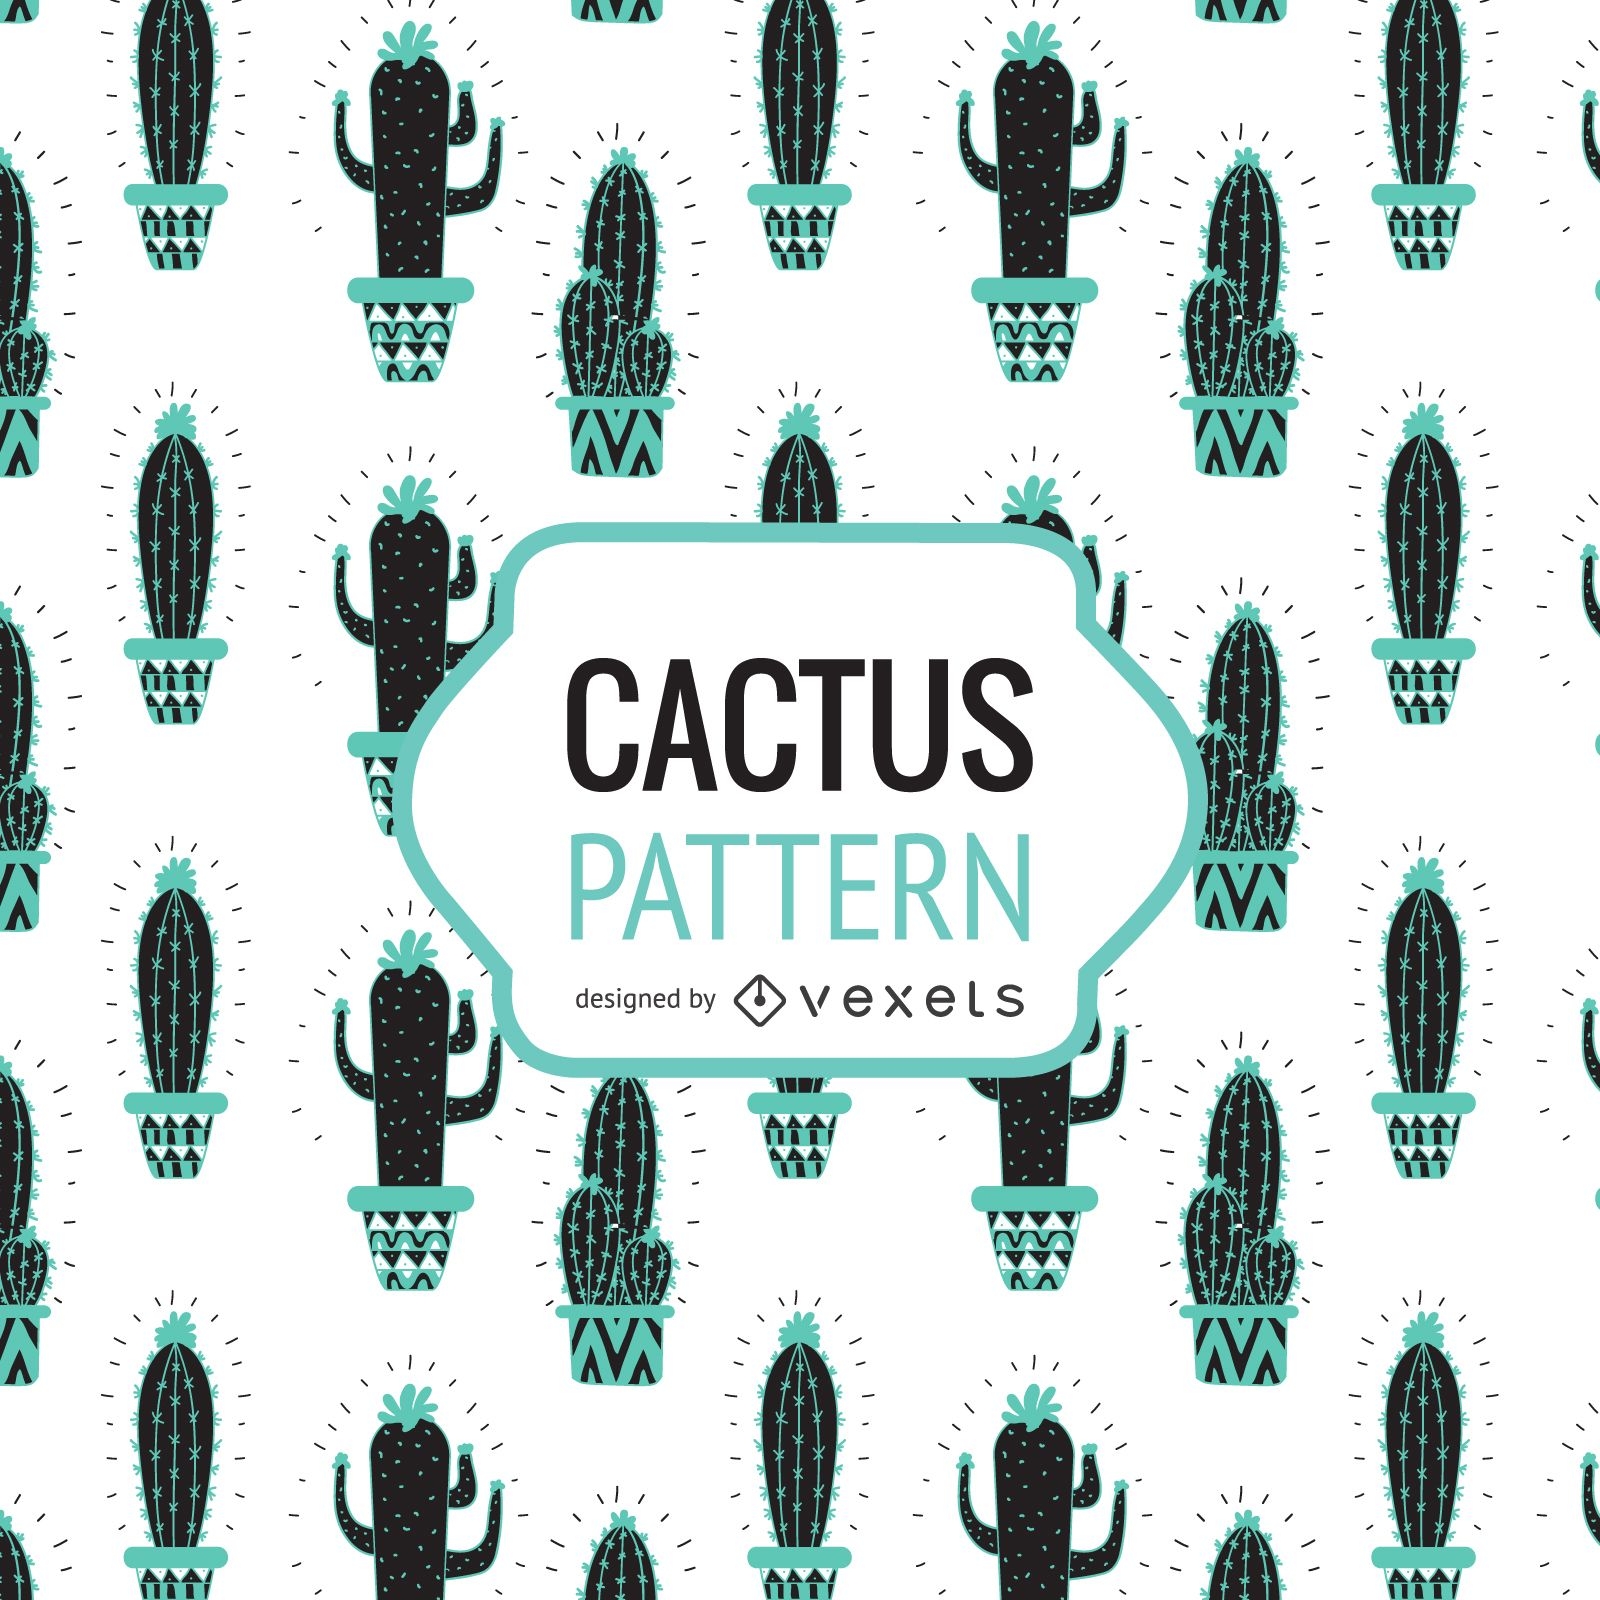 Hand drawn cactus pattern in tones of blue